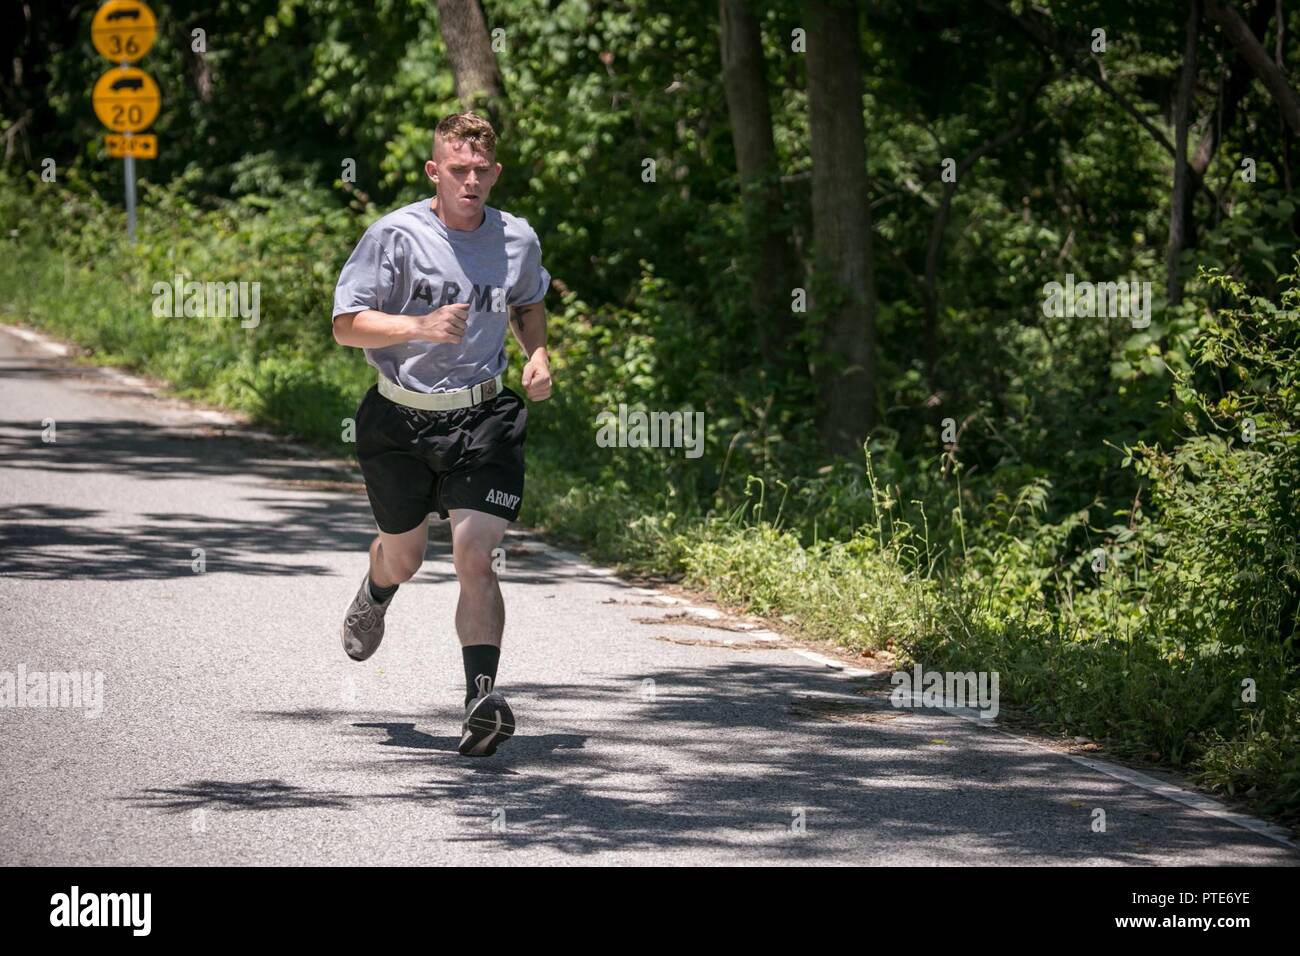 U.S. Army Pfc. Robert Nelson, assigned to 687th Rapid Port Opening Element, runs a 2-mile route during the Army physical fitness test portion of the 2017 Army Materiel Command's Best Warrior Competition July 16, 2017, at Camp Atterbury, Indiana. During the three-day competition, these elite warriors are test on basic and advanced warrior tasks and drills. Stock Photo